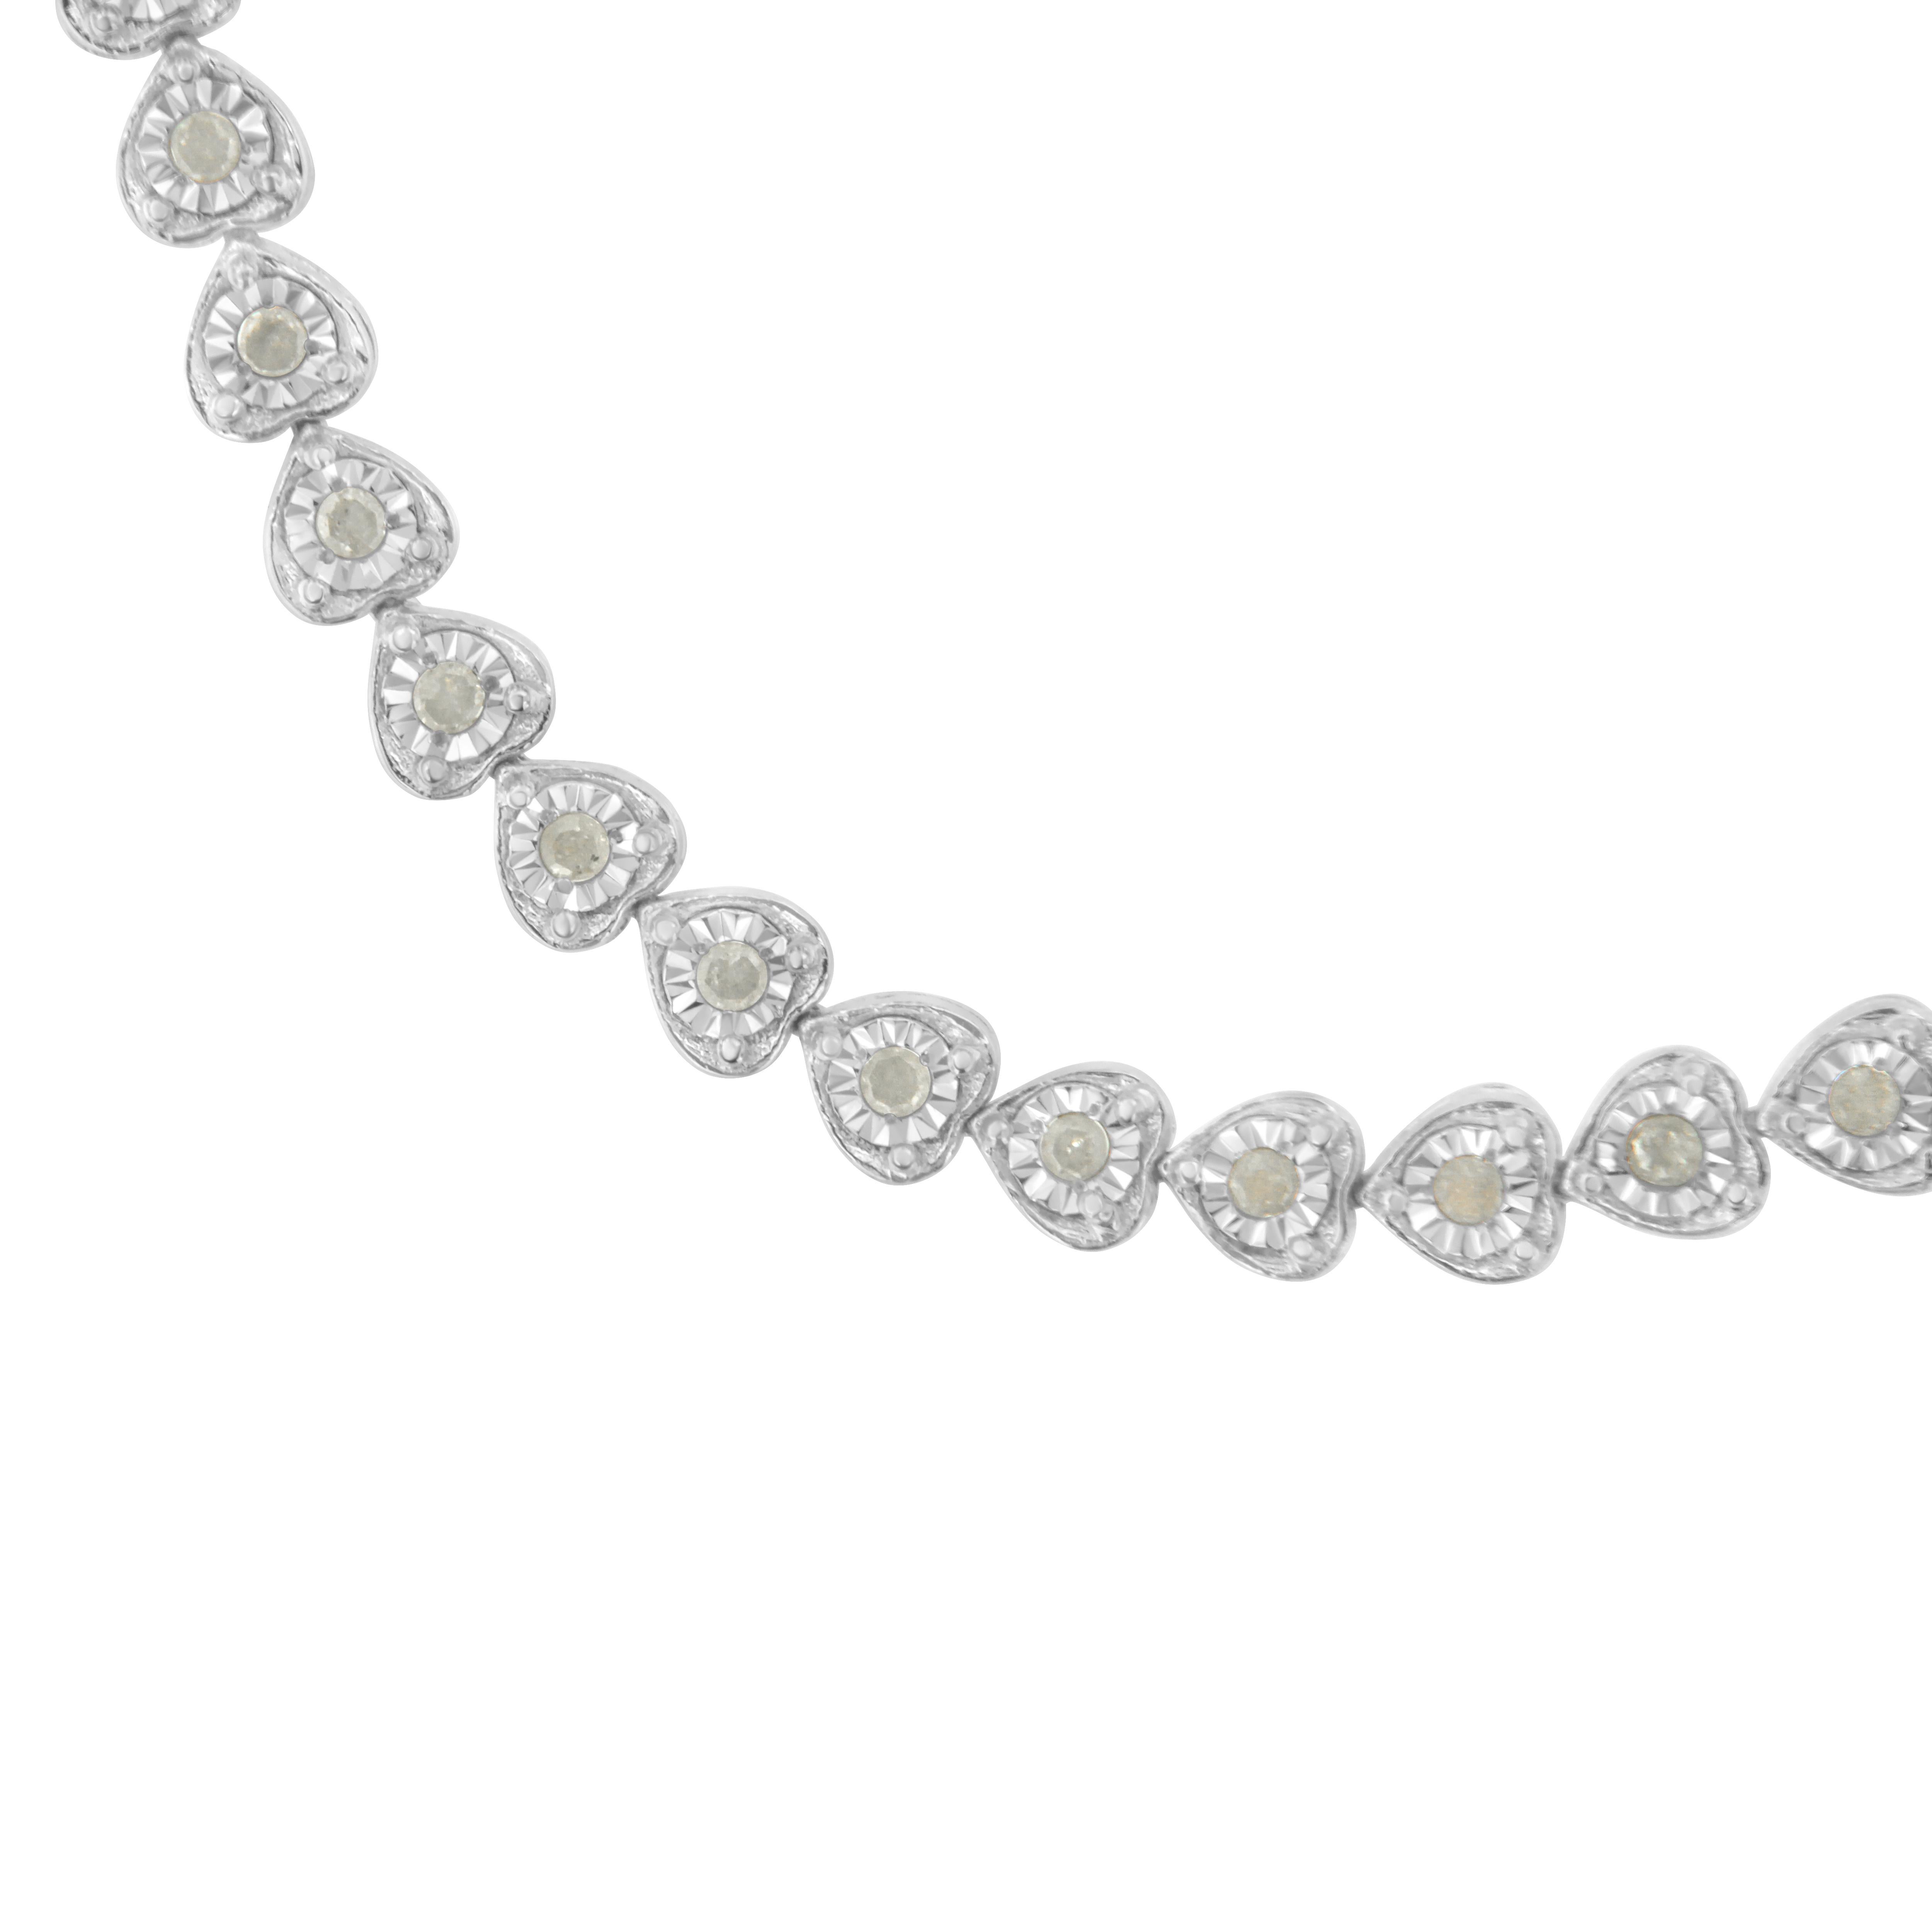 Create your signature look by wearing this elegant diamond tennis link bracelet. Featuring a seamless row of heart accents, adorned with rose-cut diamonds and set in a sterling silver framing this bracelet has a classy appearance. This modern